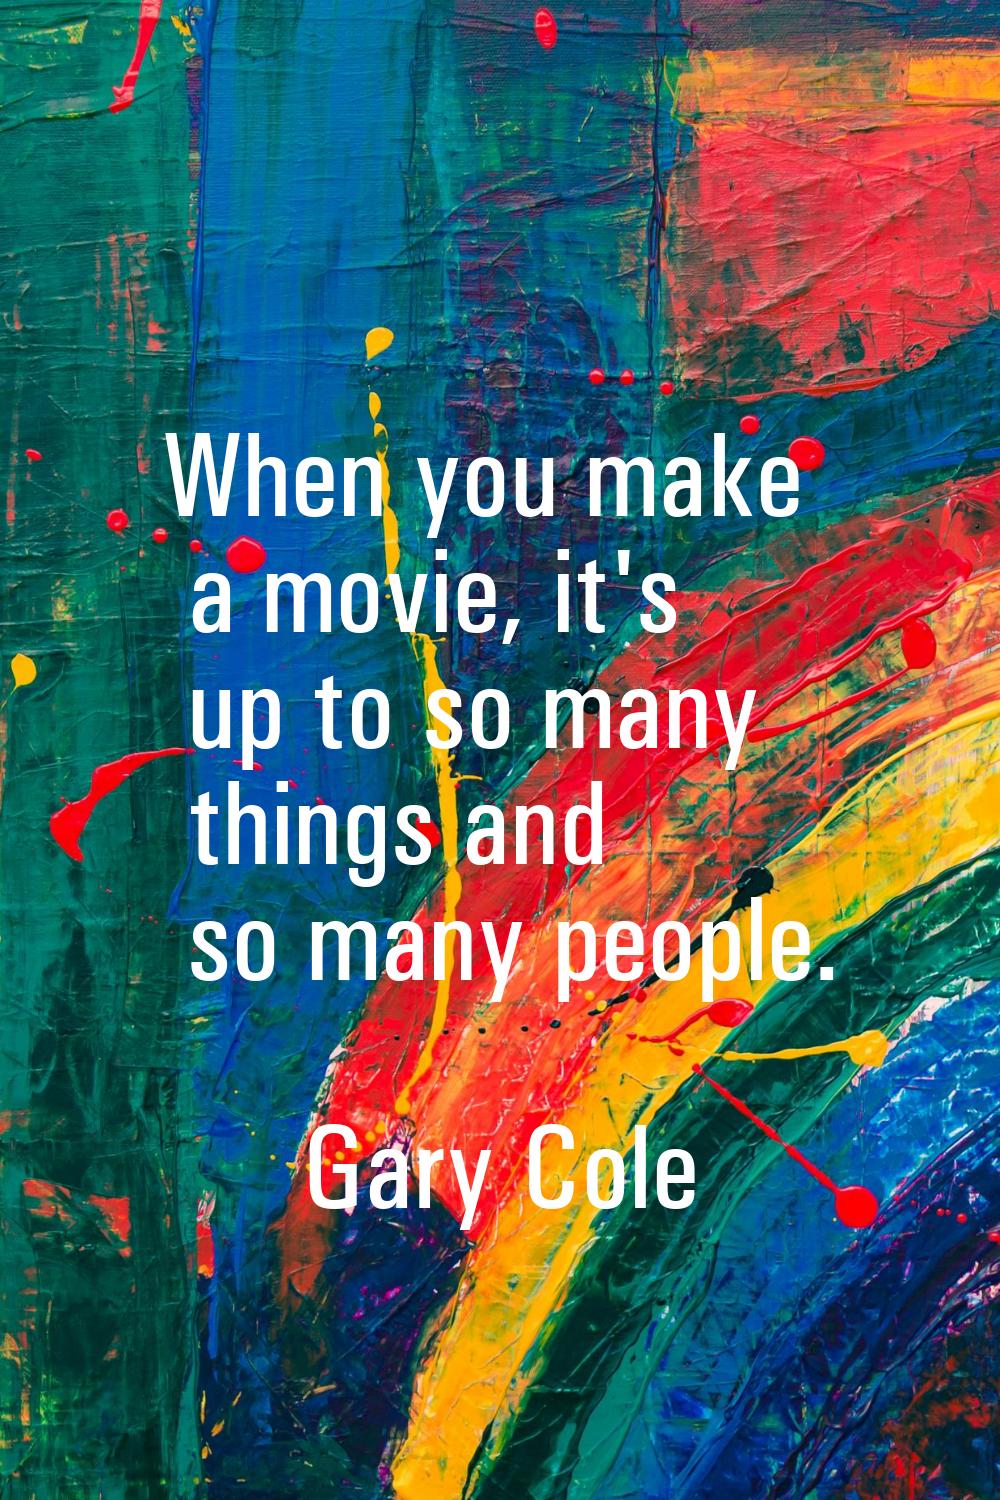 When you make a movie, it's up to so many things and so many people.